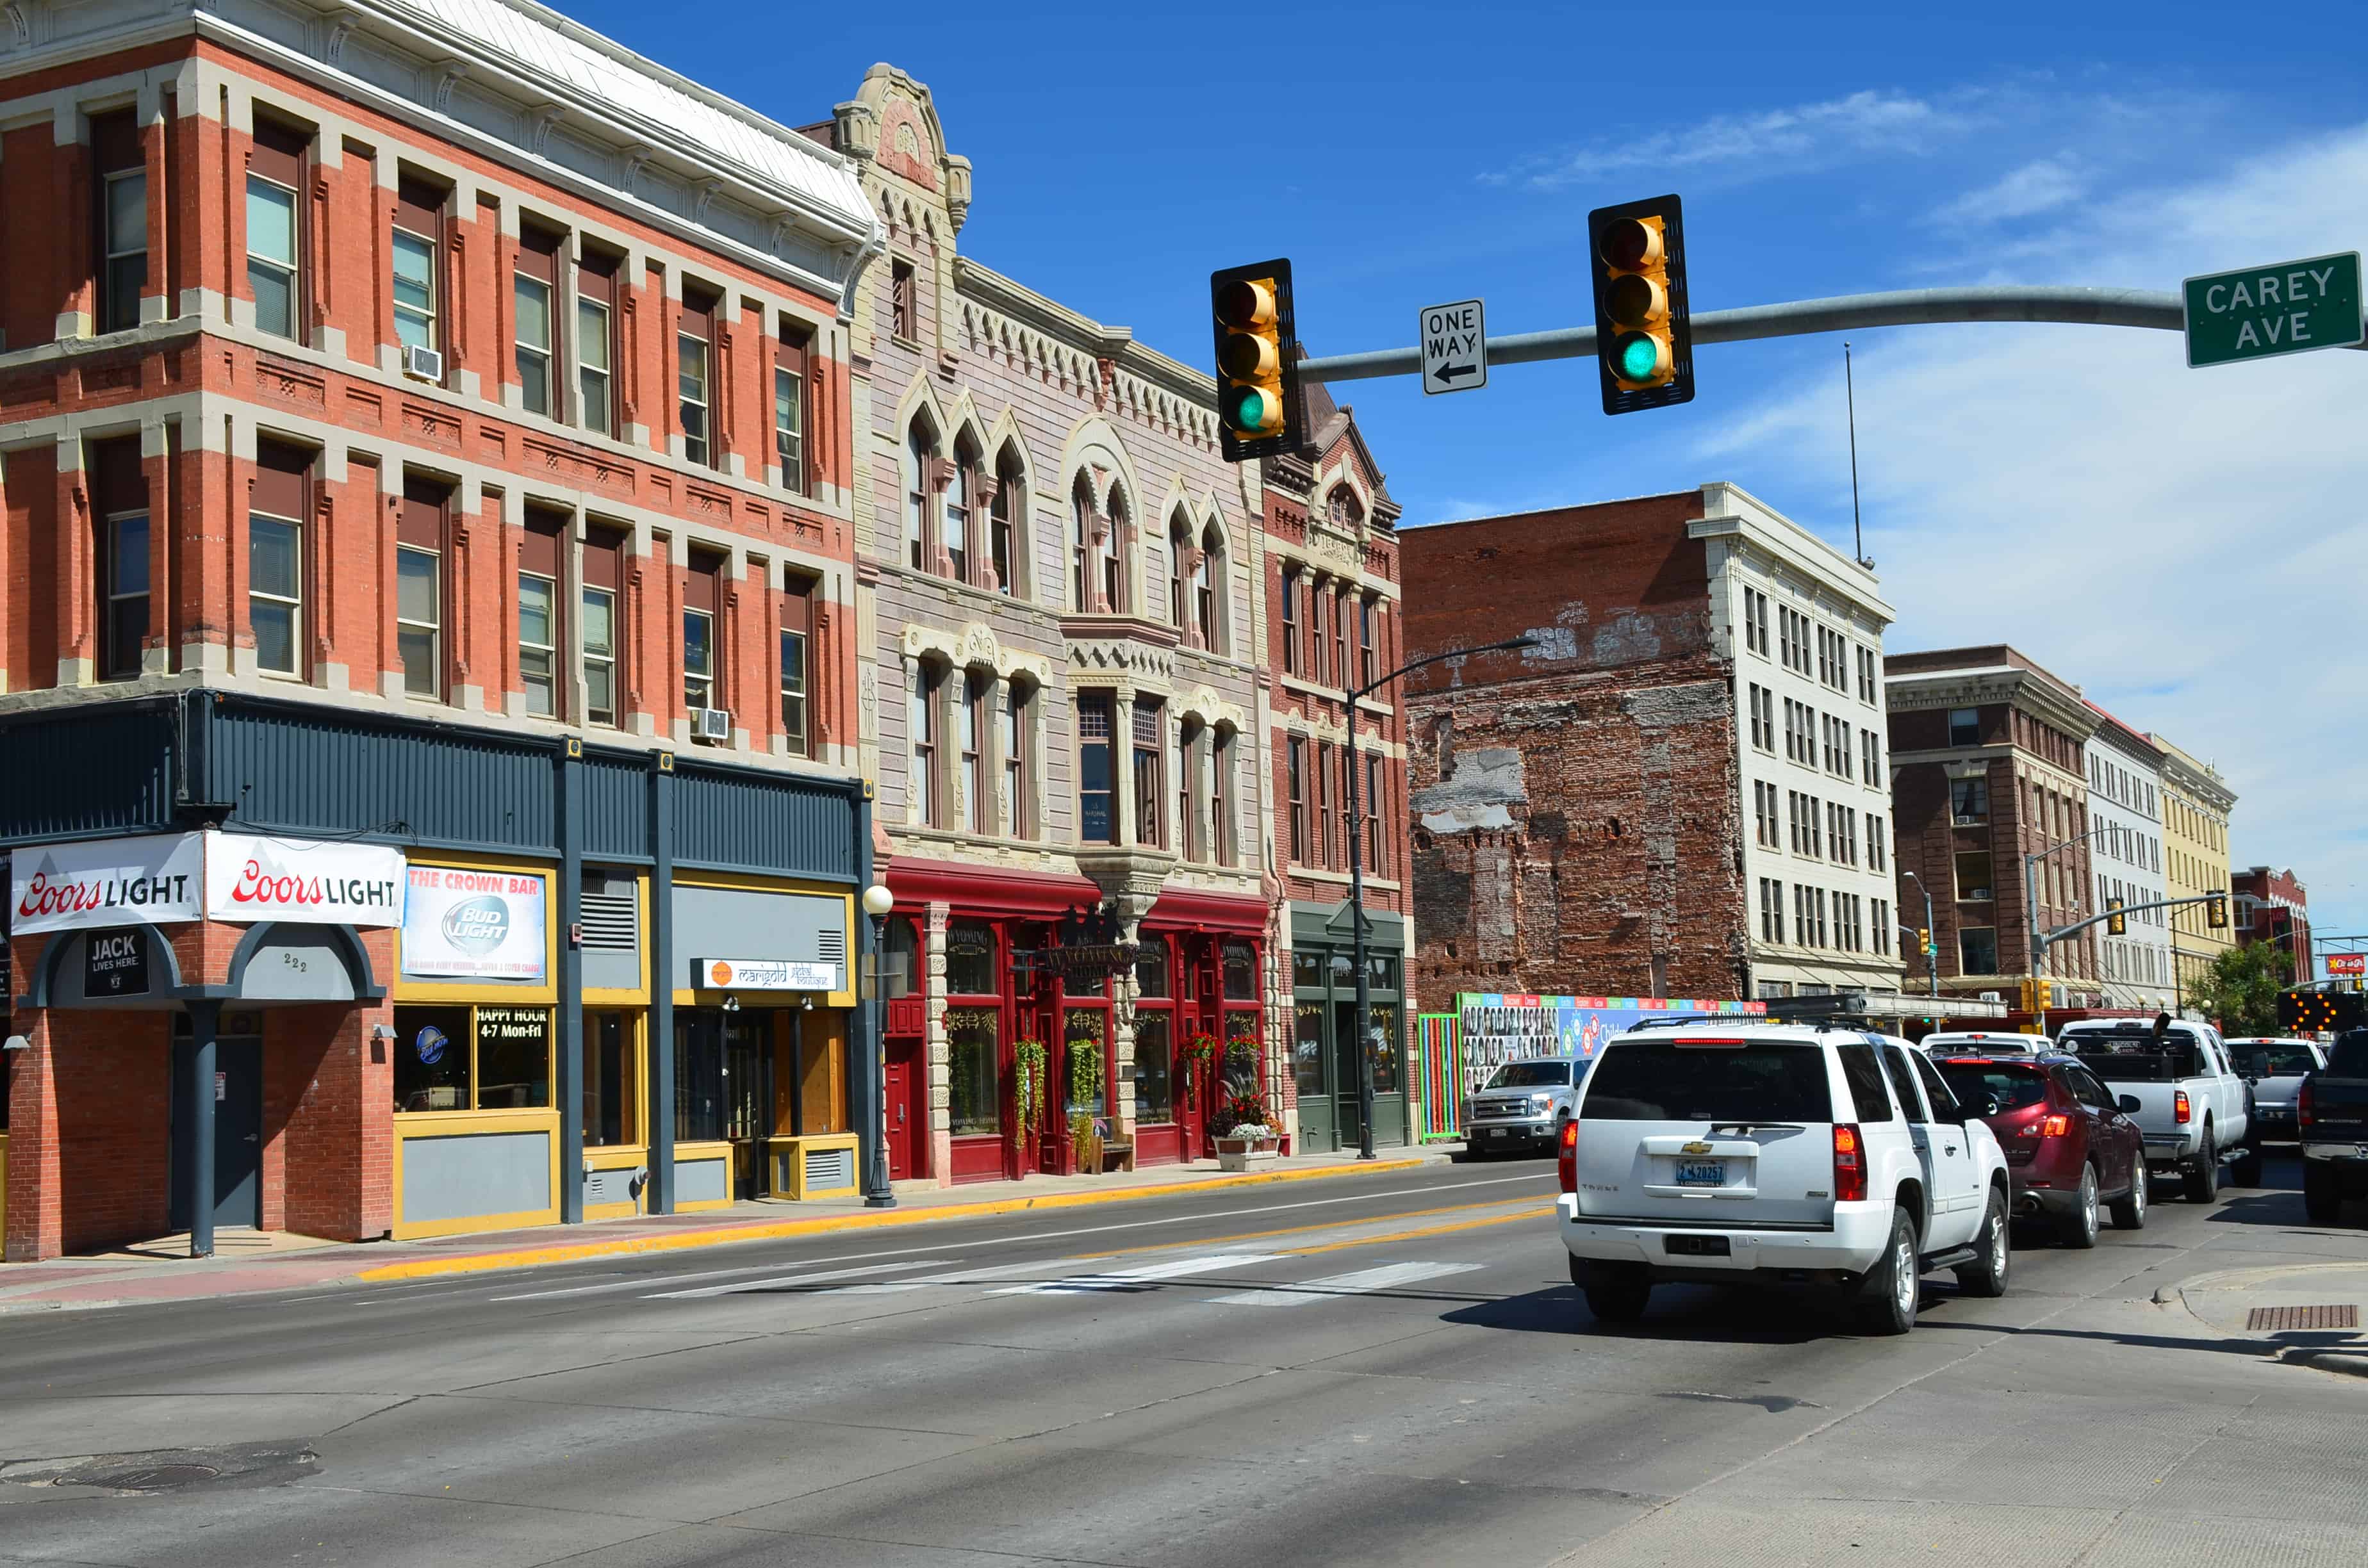 Lincolnway in Cheyenne, Wyoming